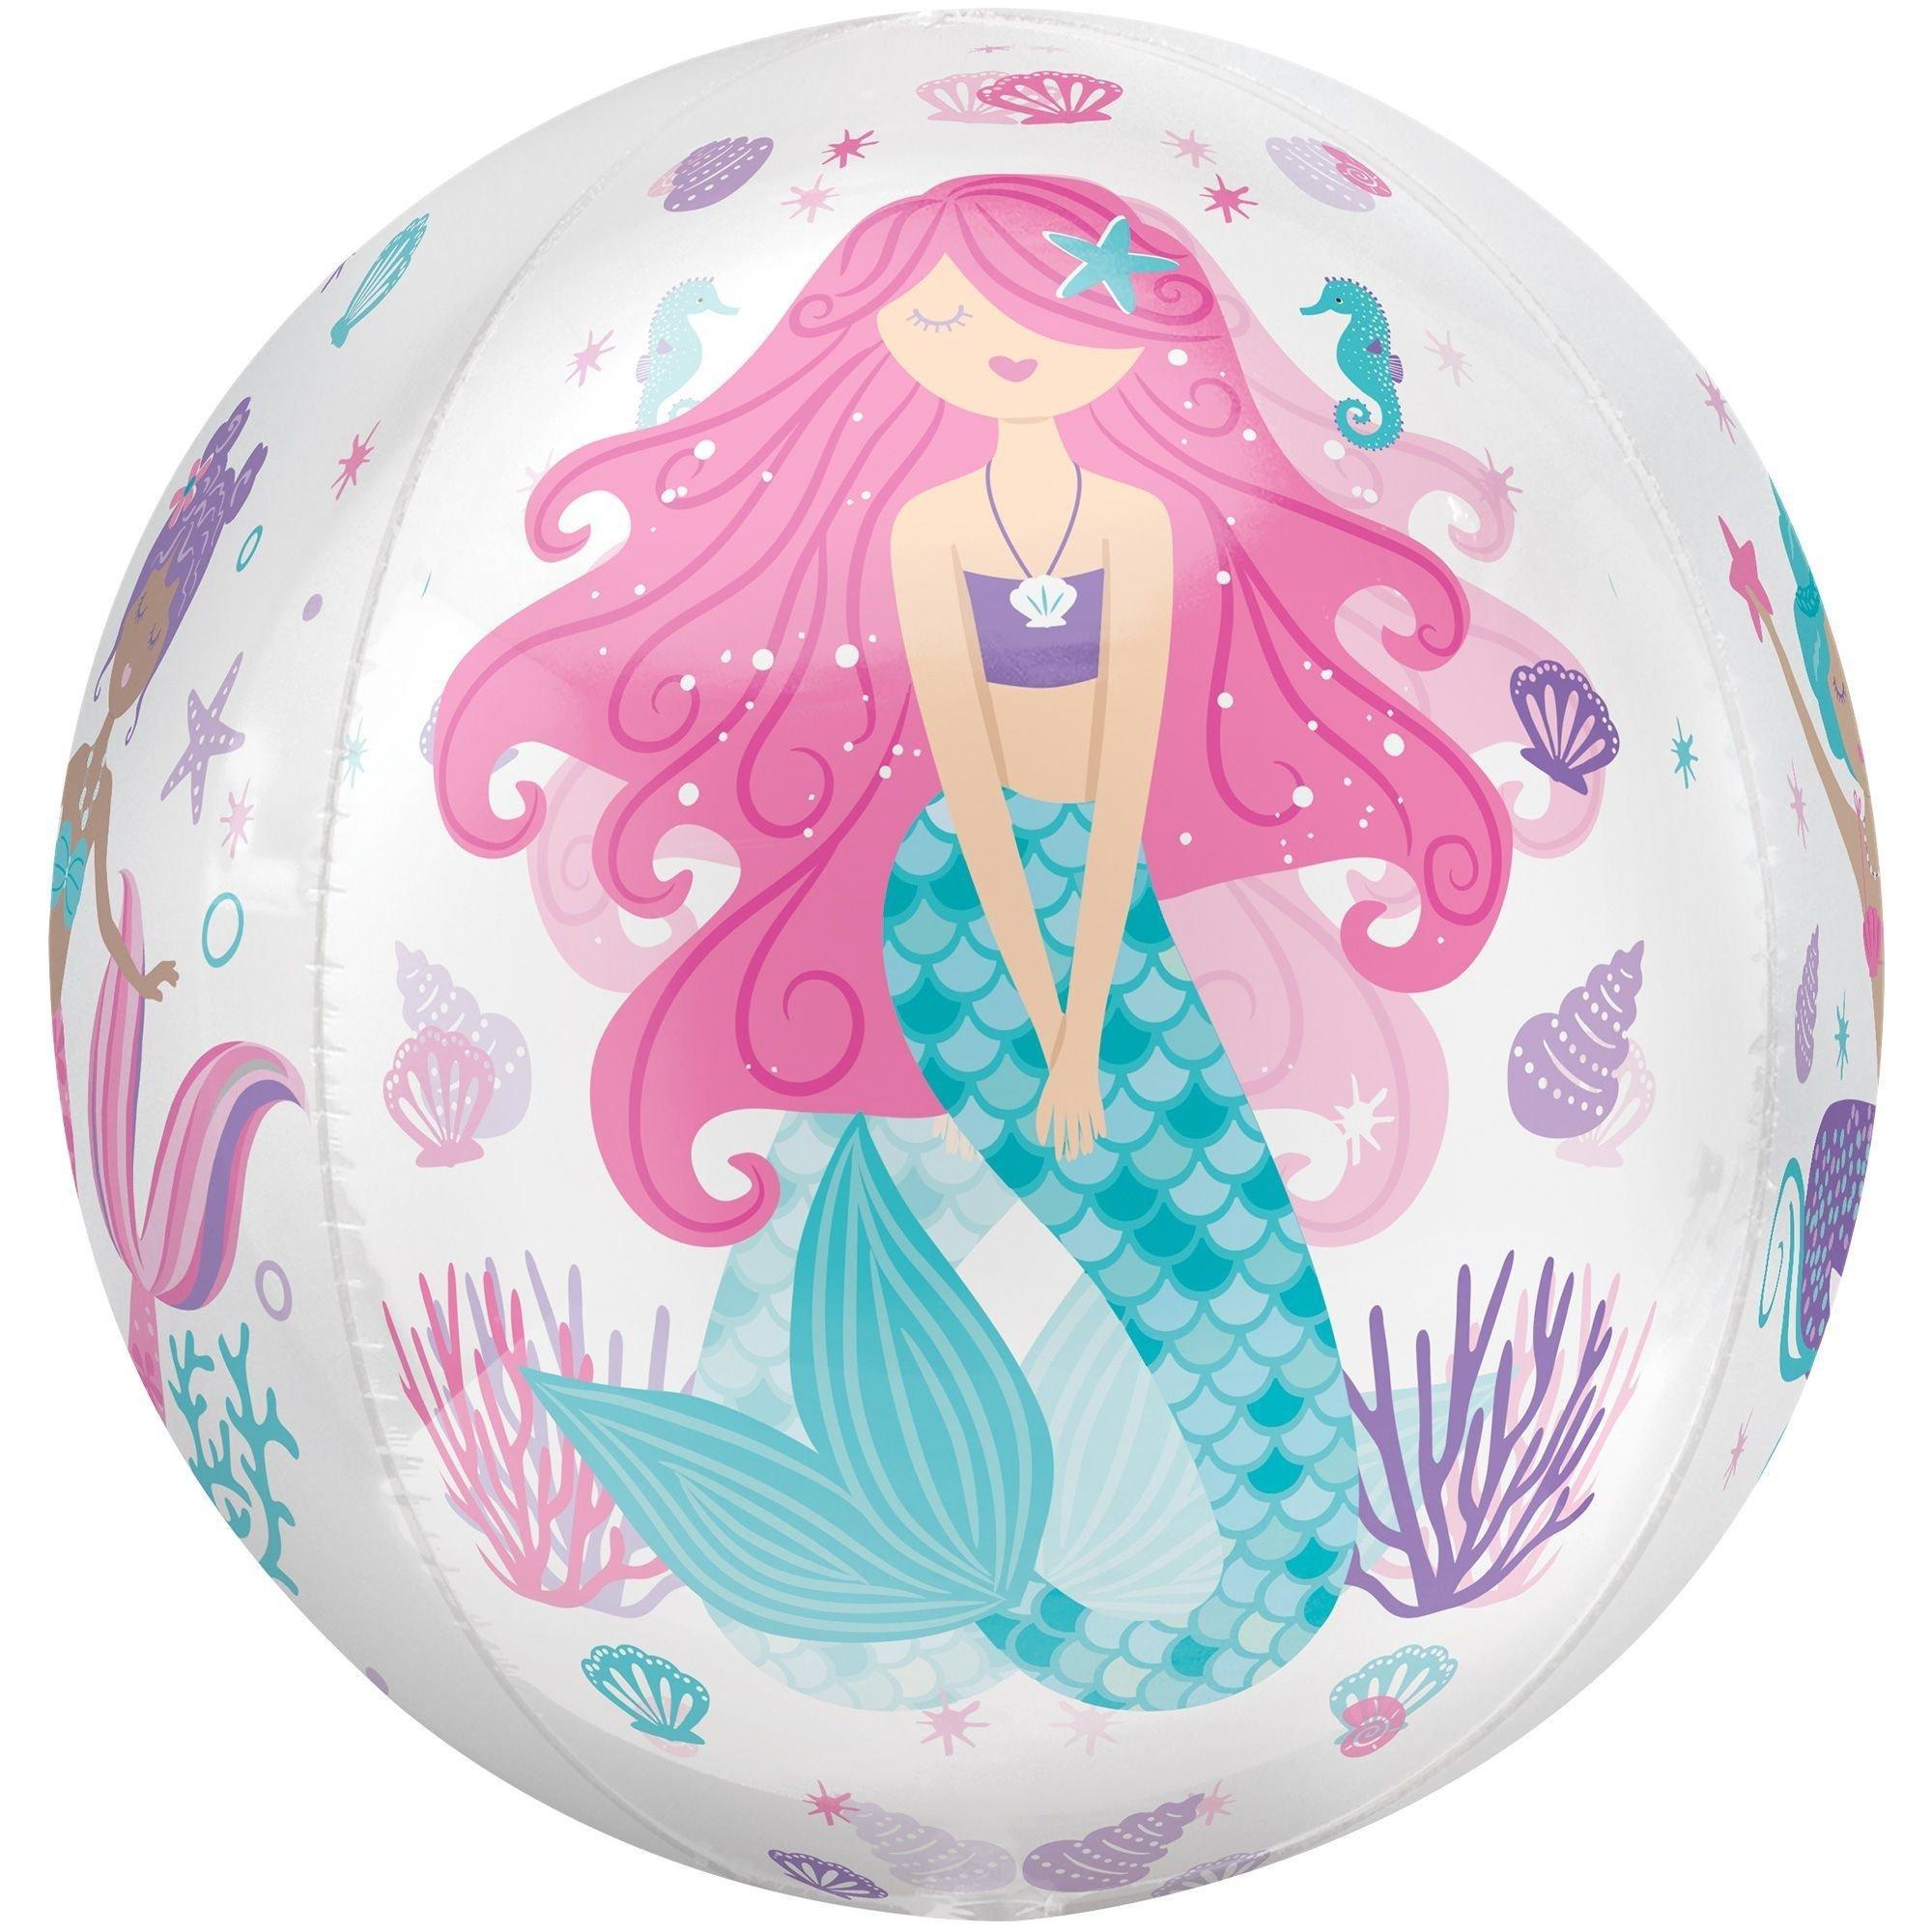 Premium Shimmering Mermaid Foil Balloon Bouquet with Balloon Weight, 13pc